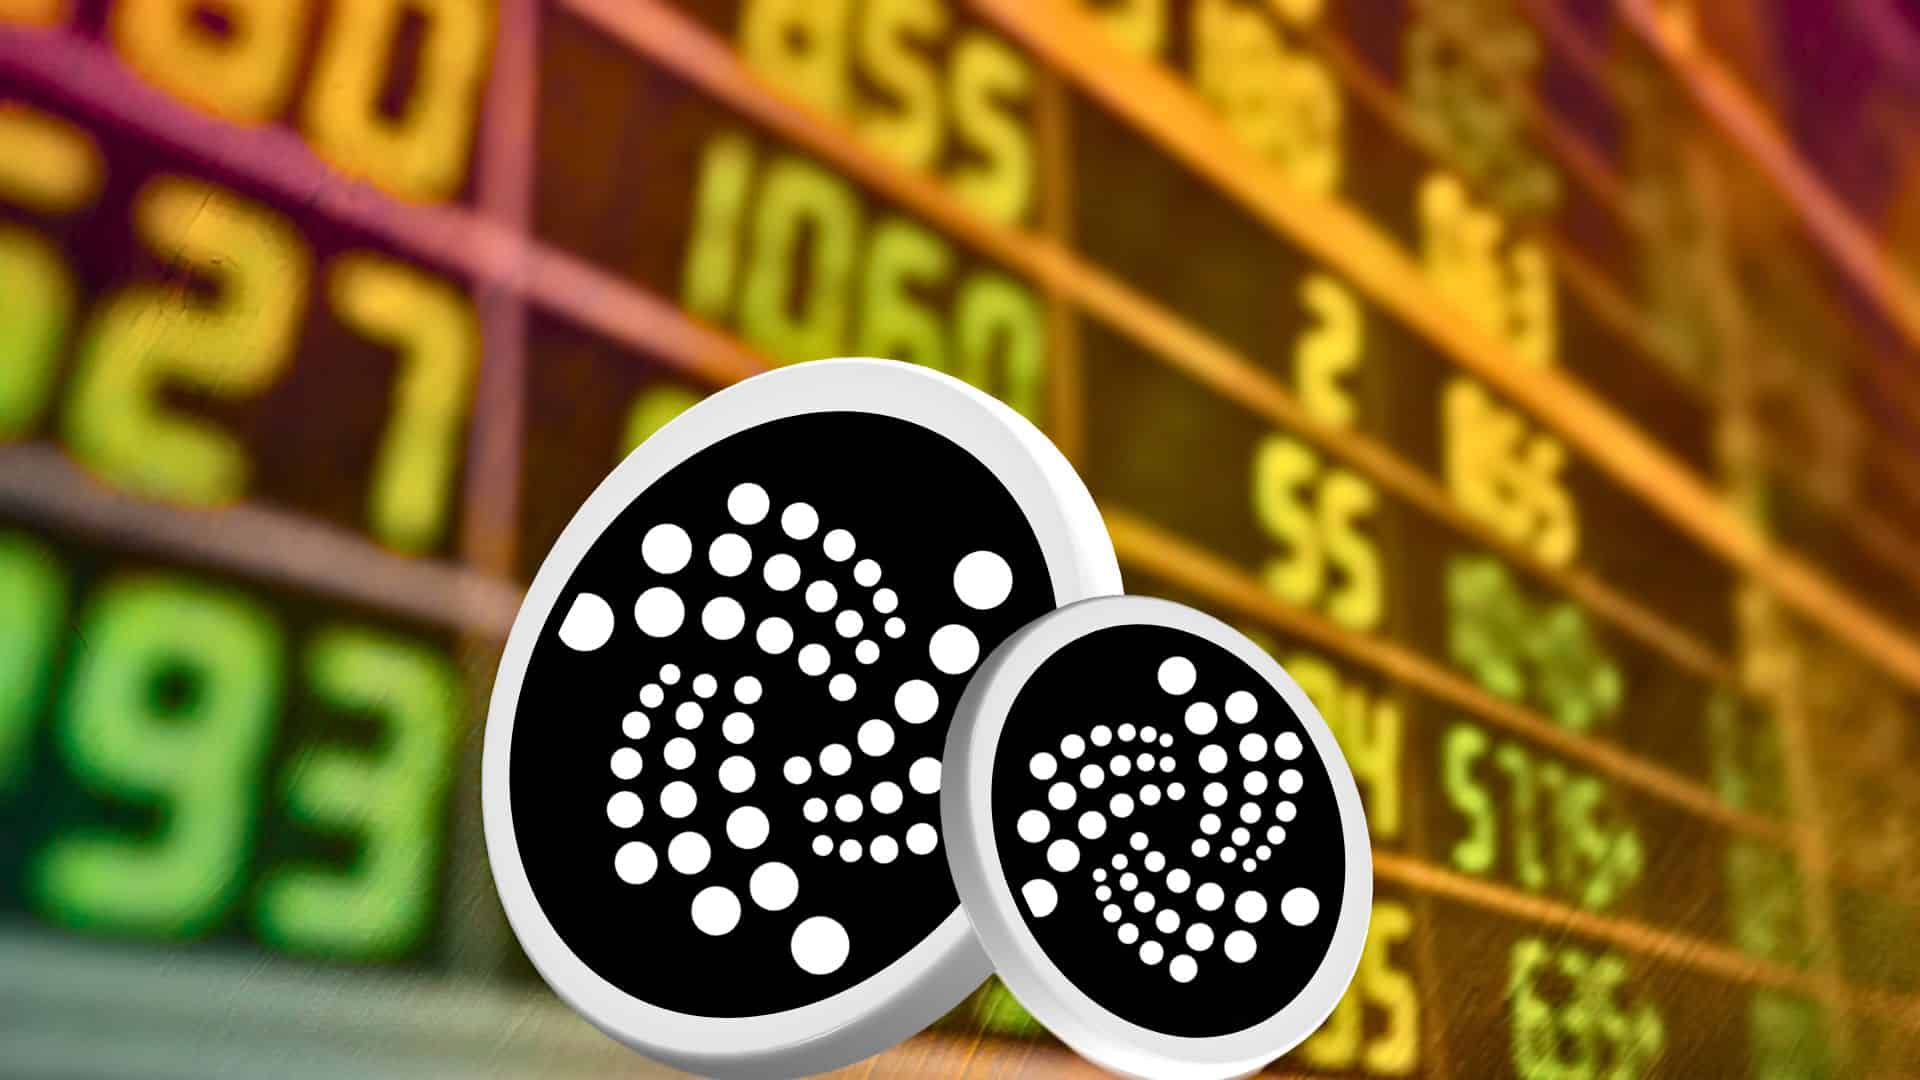 IOTA Wants to Be the Leading Blockchain for Tokenized Assets and Reach a Trillion-Dollar Market by 2030